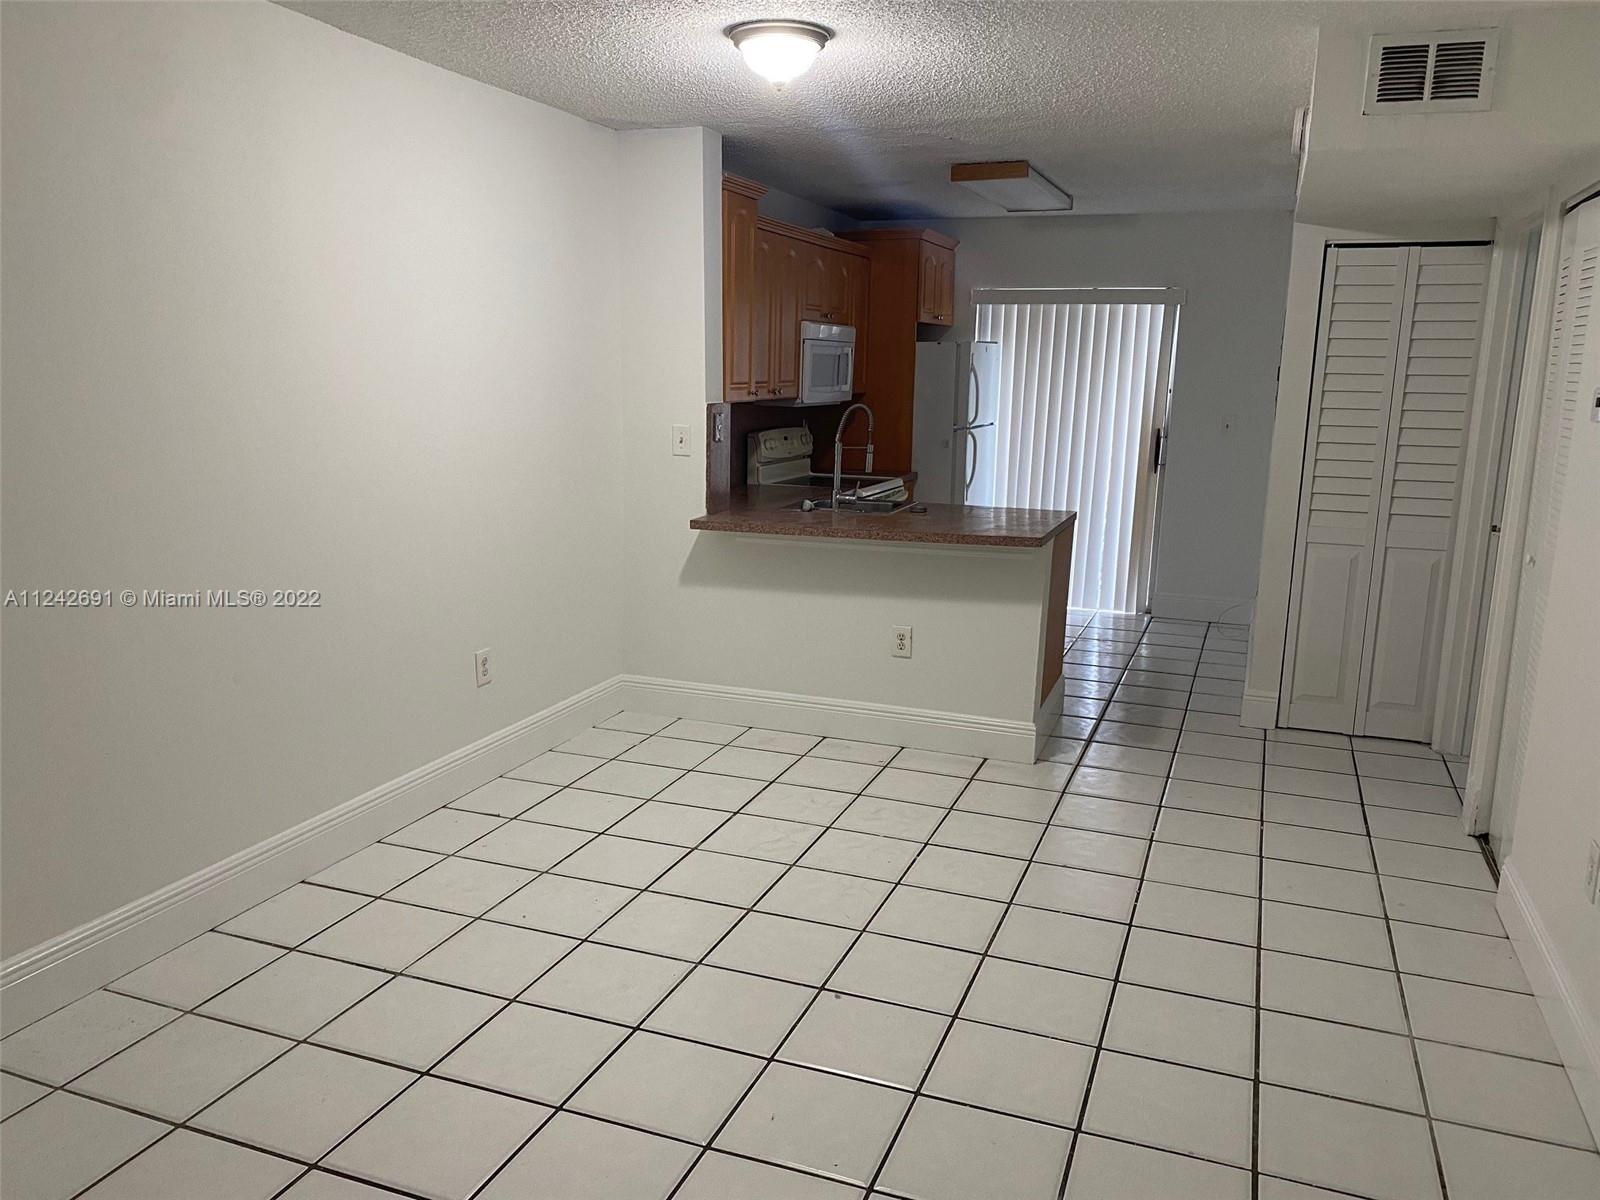 Location, location! Excellent layout for a 2 bed, 2 bath unit located on the first floor. Washer/Dryer inside the unit, freshly painted, and refinished bath tubs. Ready for move-in or great investment property.